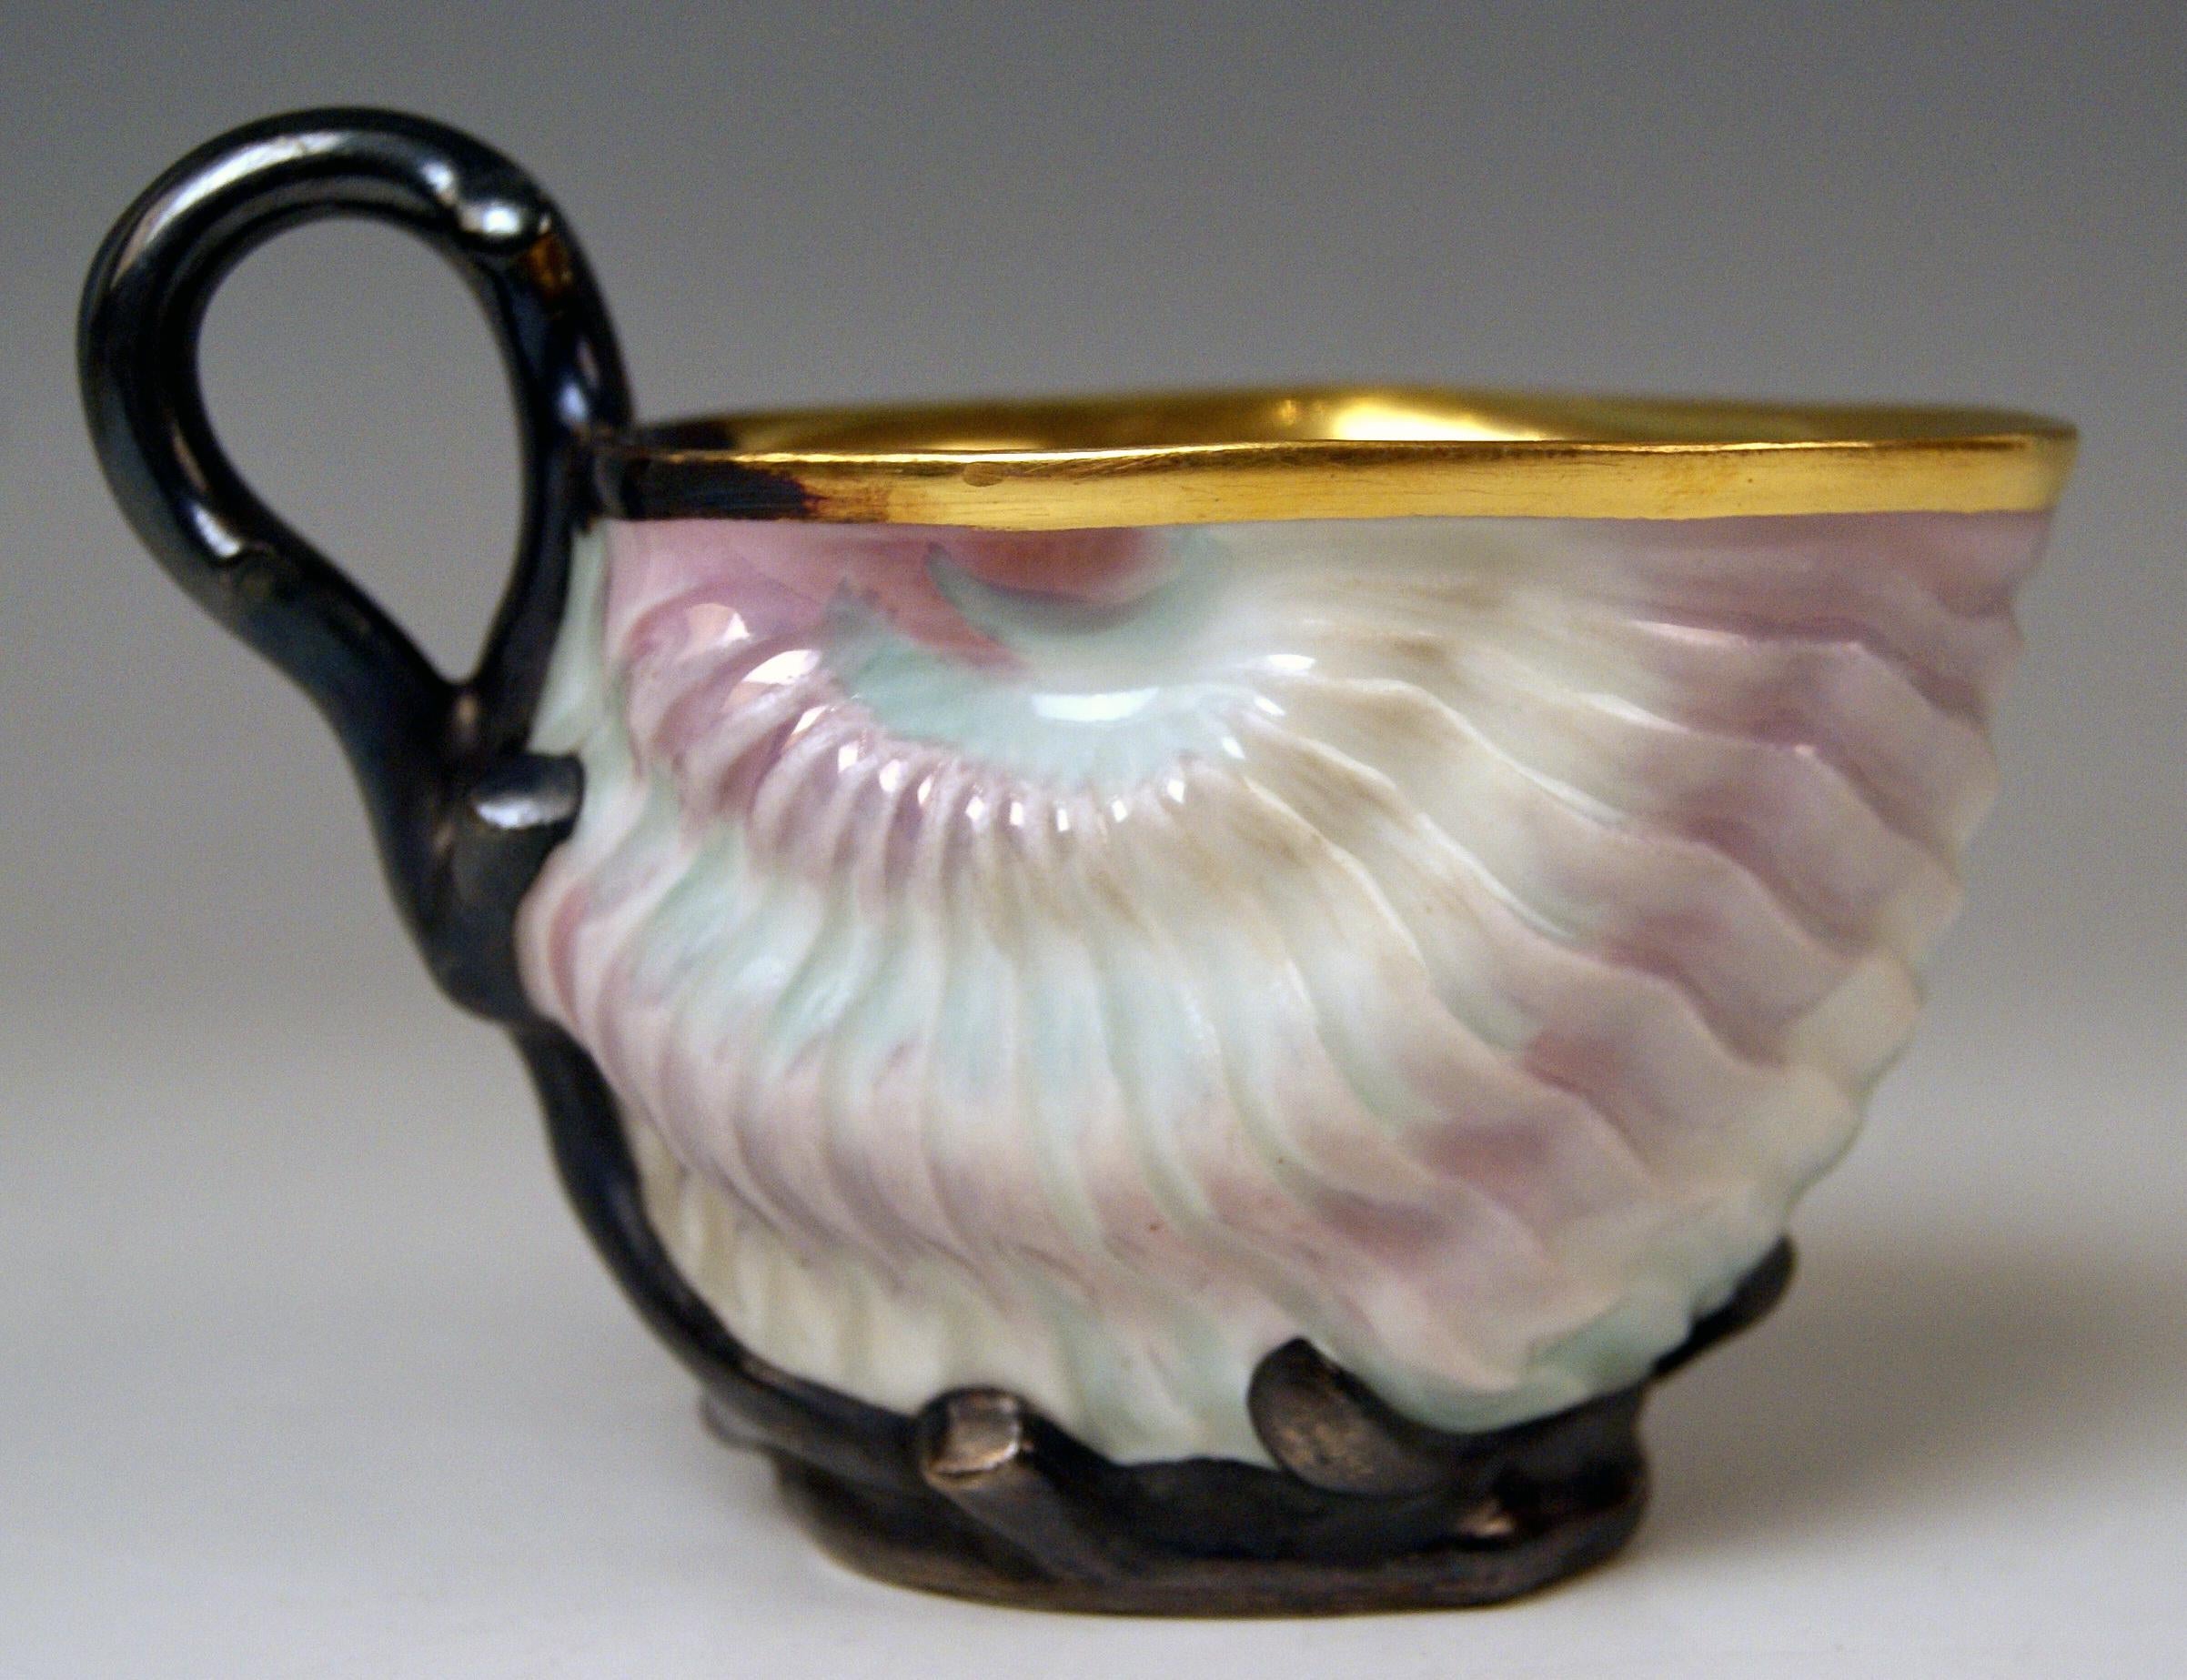 Vienna Imperial Porcelain Cup Saucer Shaped as Snail and Round Clam, 1826 2